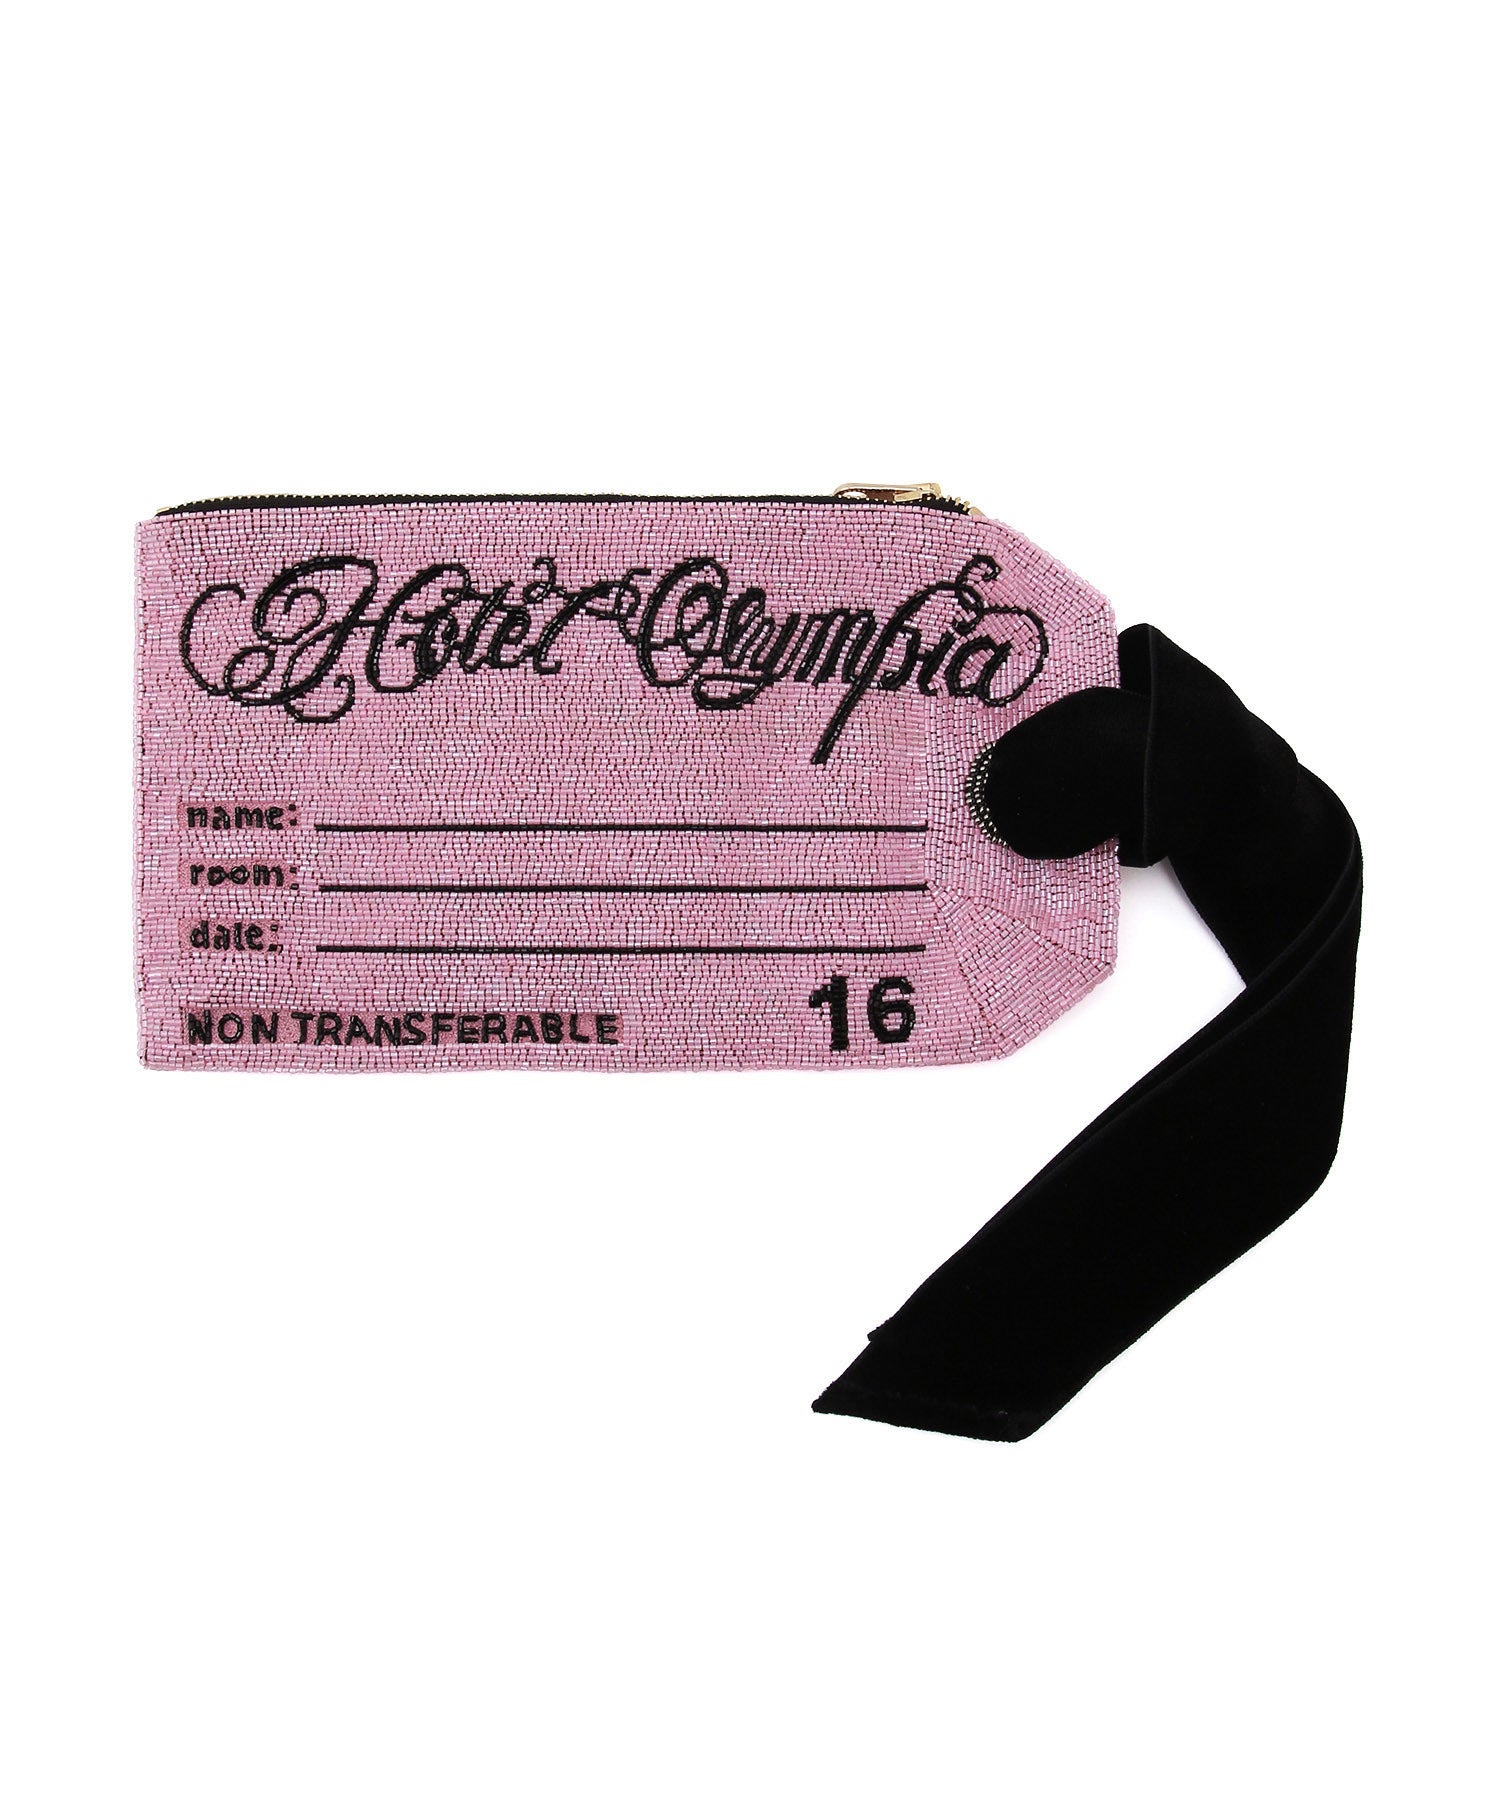 HOTEL OLYMPIA Pink Luggage Tag Bag｜J'aDoRe JUN ONLINE OUTLET